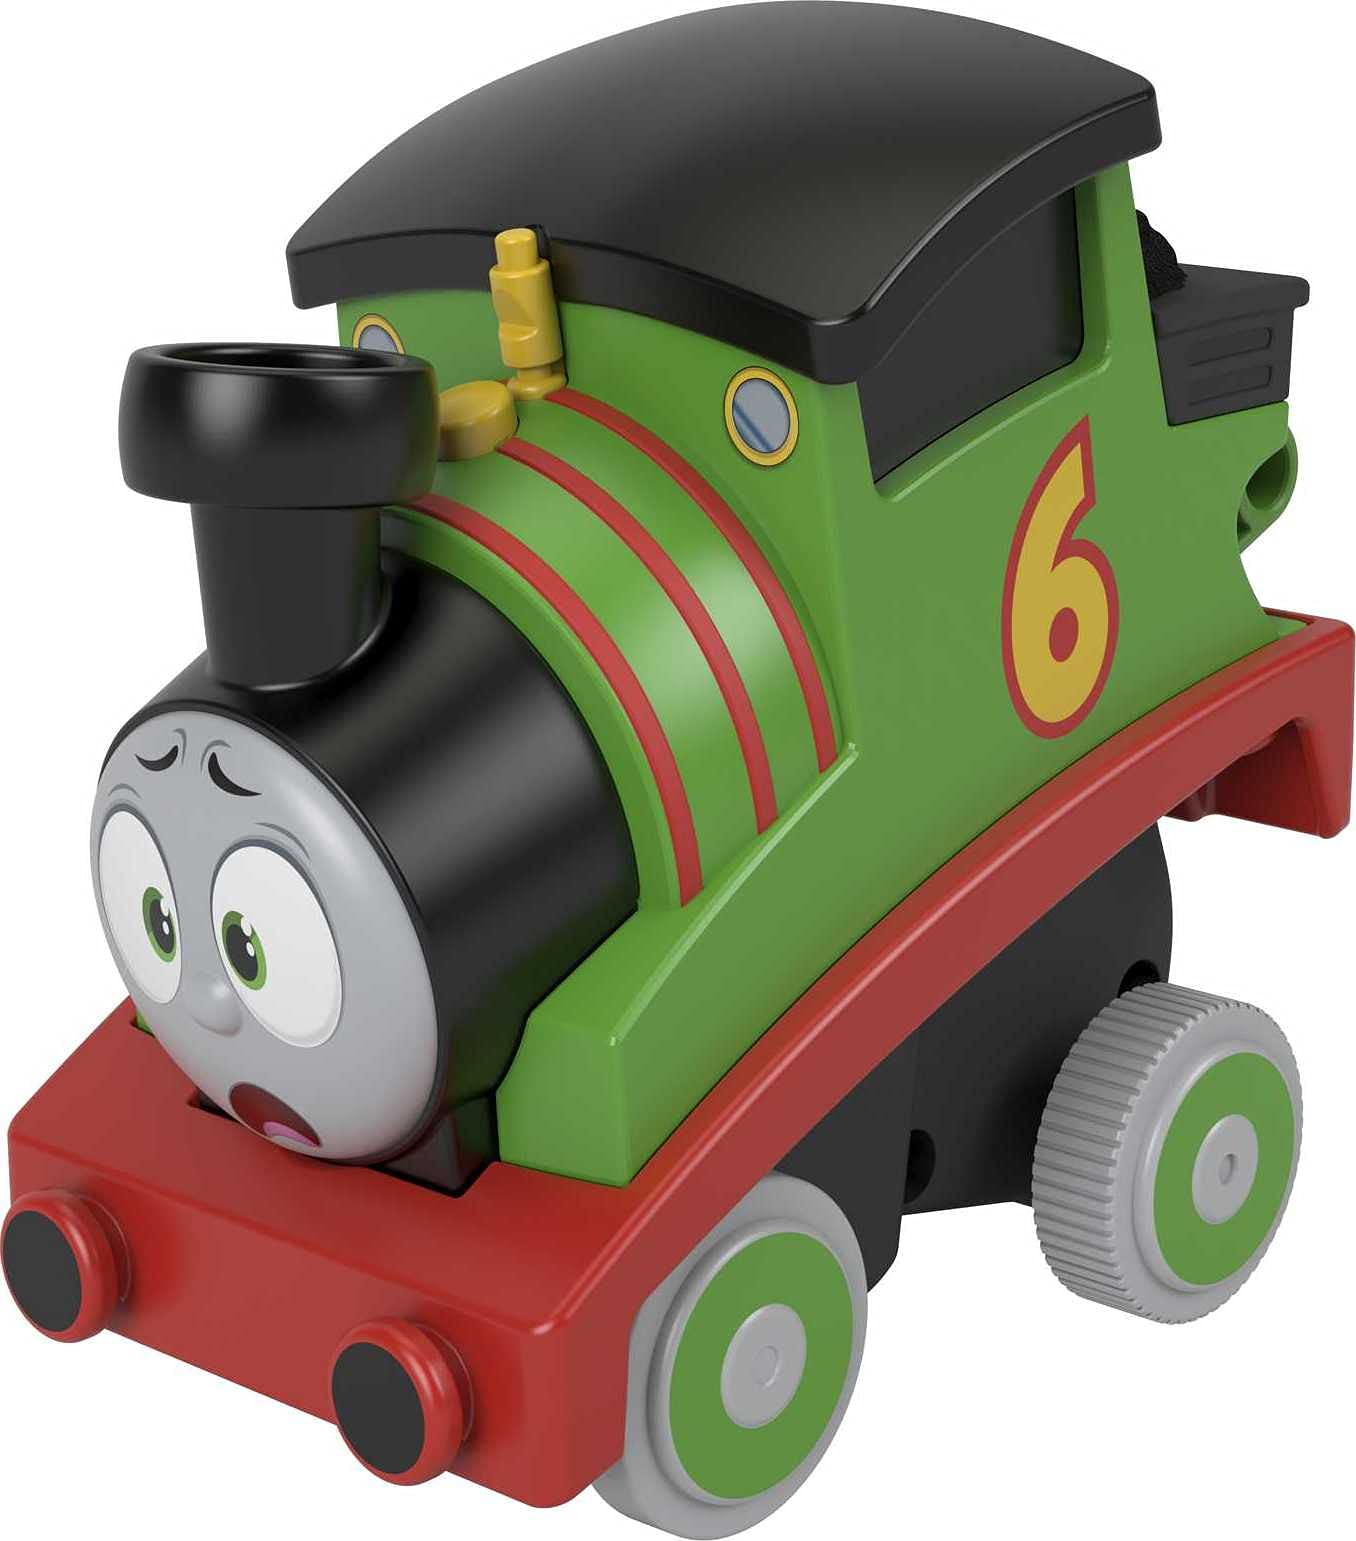 Thomas & Friends Press 'n Go Stunt Engine Toys: Percy $4.21 + Free Shipping w/ Prime or on $35+